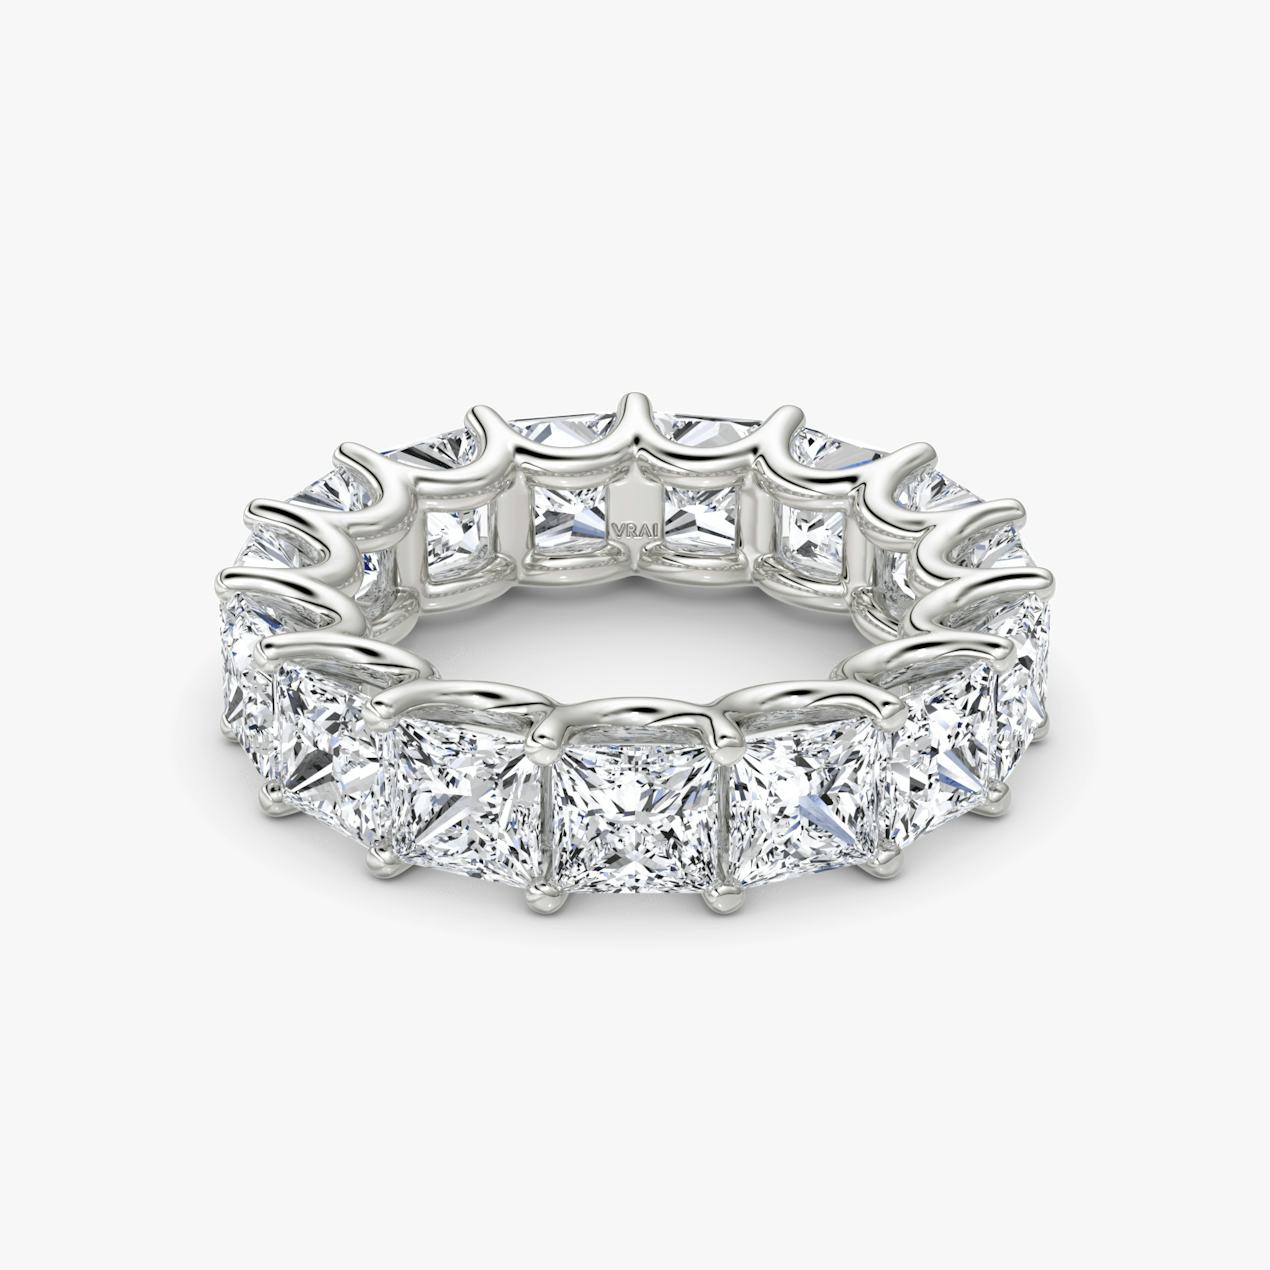 The Eternity Band